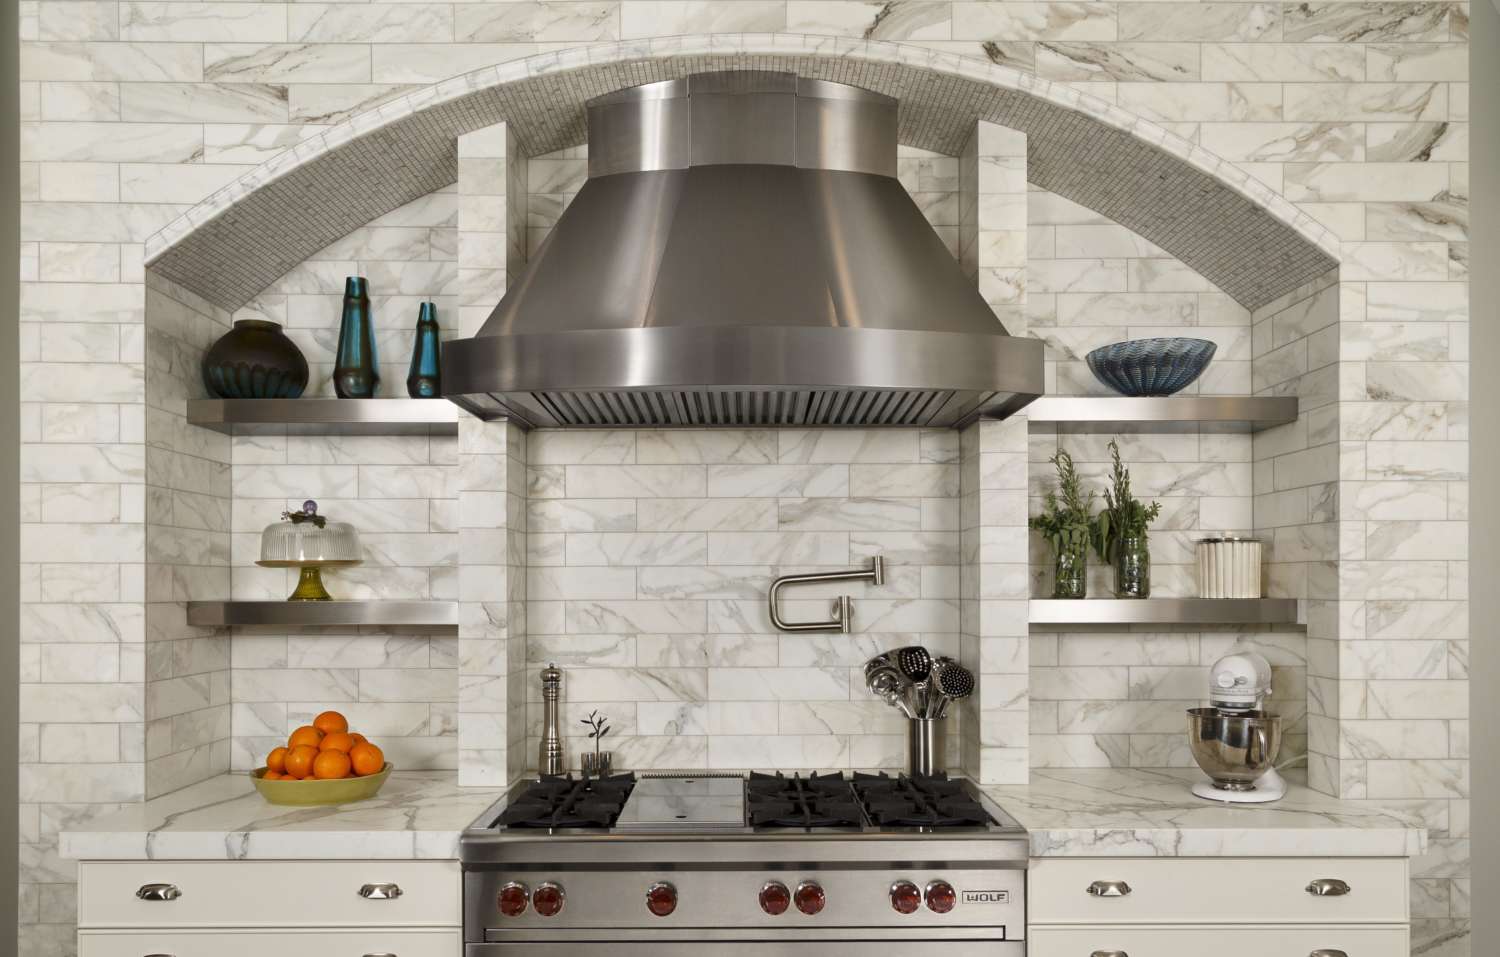 Marble brick hearth designed around stainless hood features arch and built-in stainless shelves. Range is flanked by white-painted custom kitchen cabinets.